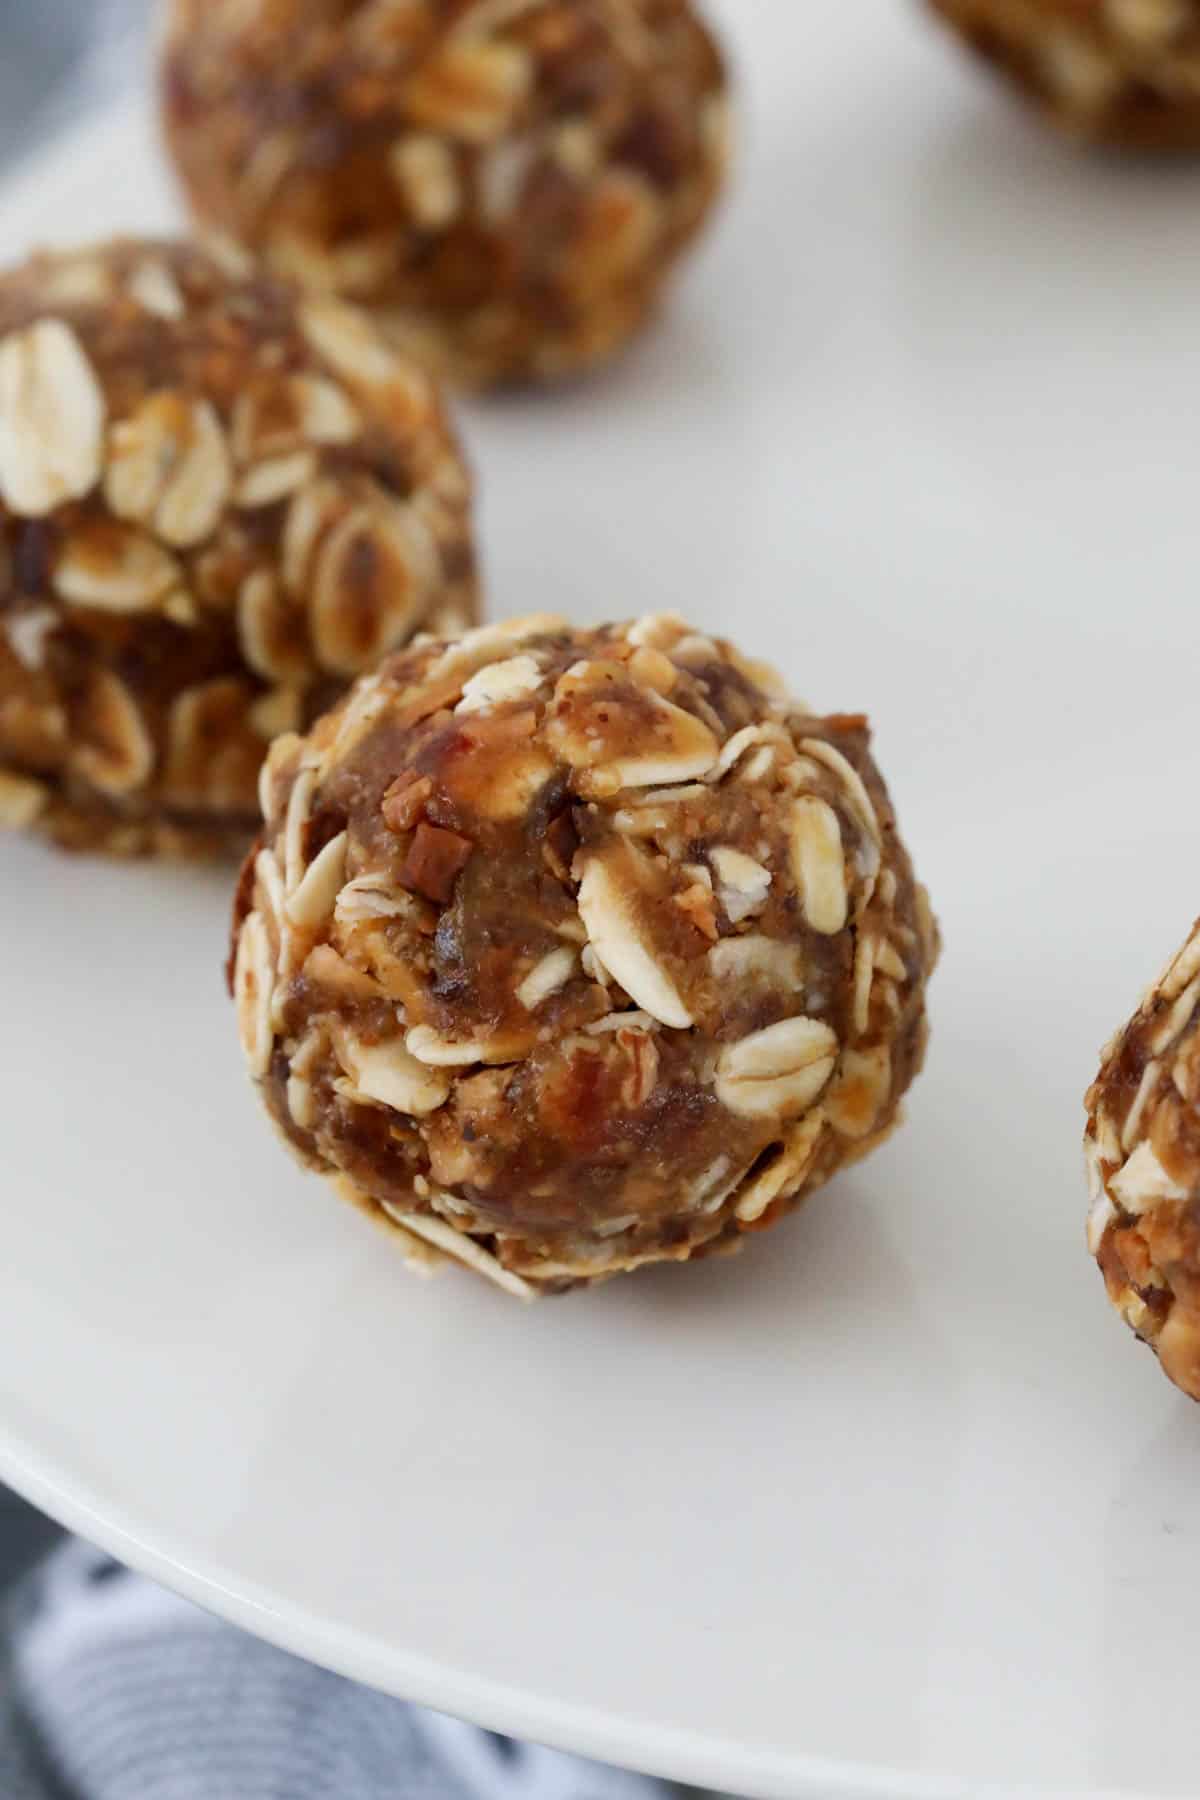 Rolled oats, chopped nuts and dates, rolled into little balls.